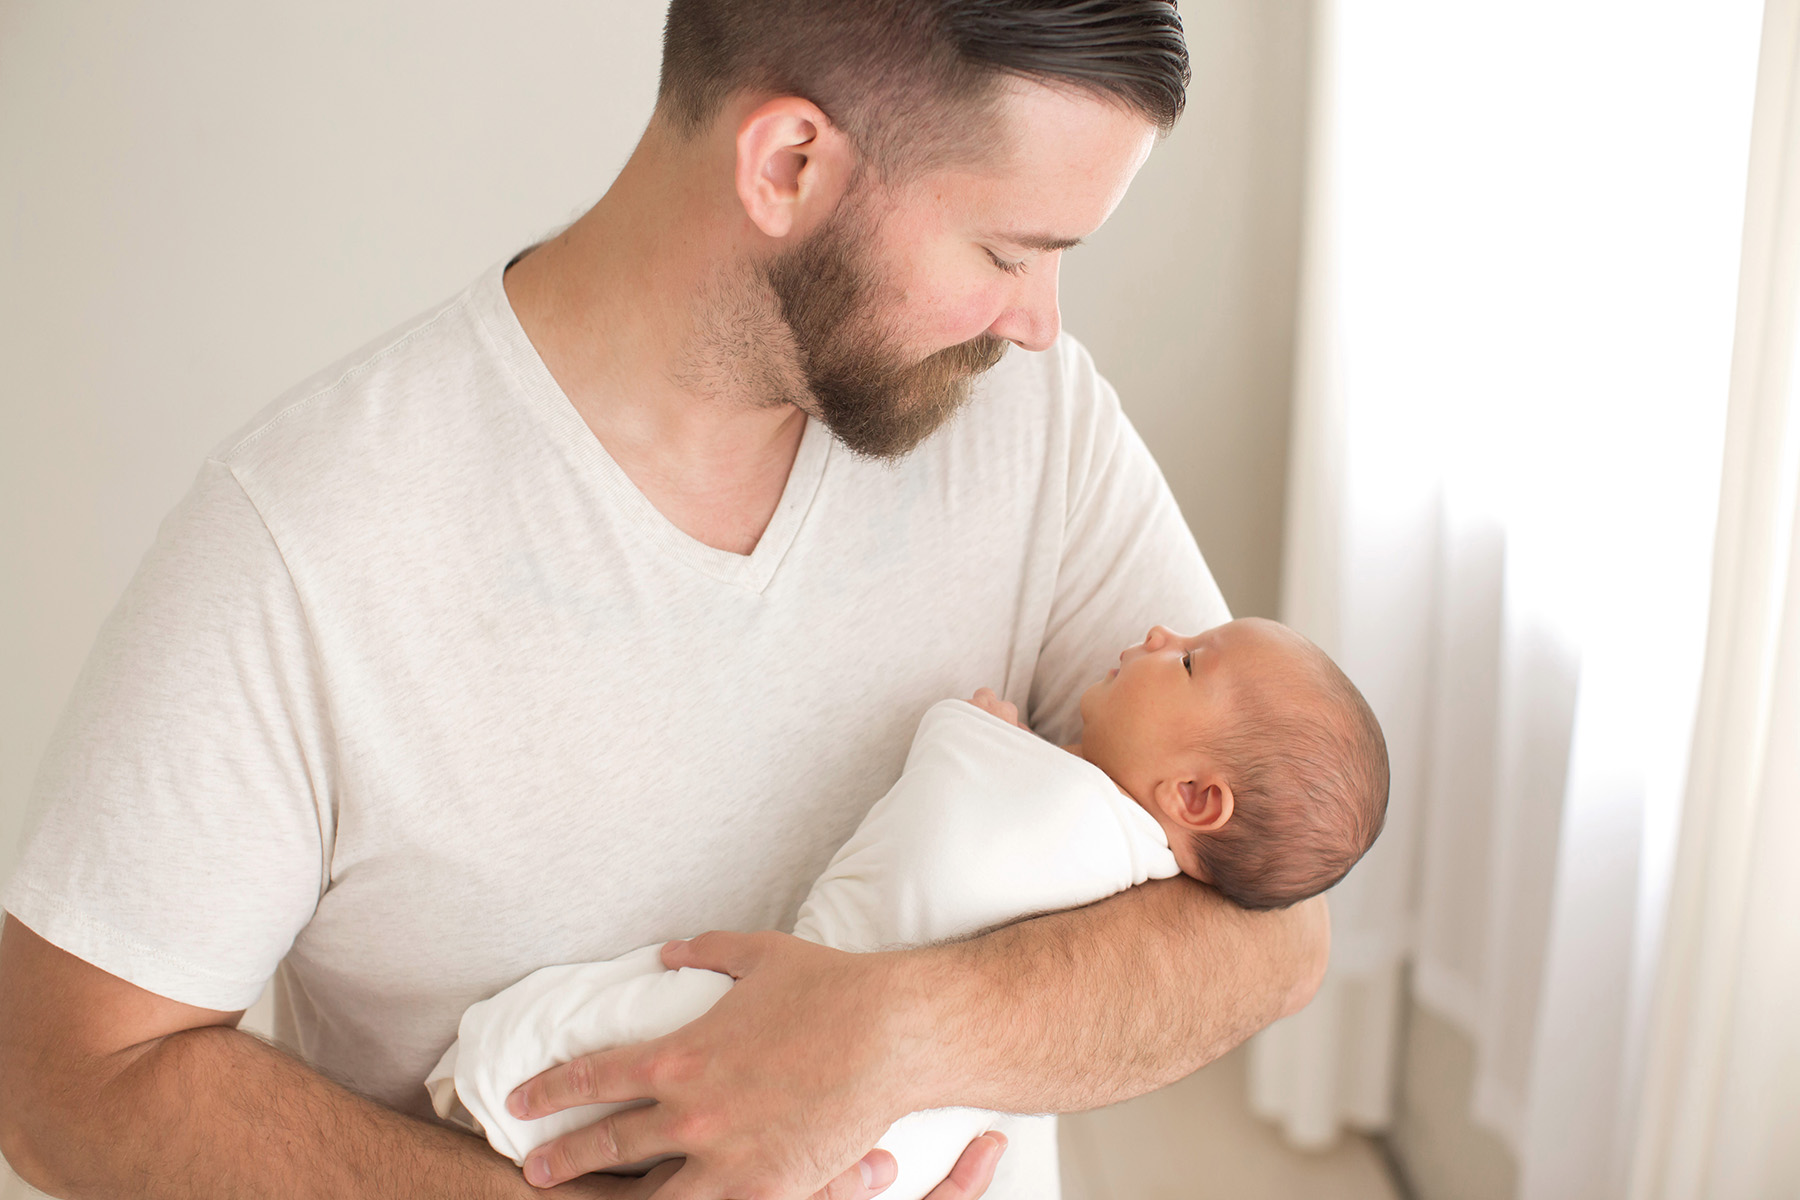 Louisville KY Newborn Photographer | Julie Brock Photography | Family Photographer | Maternity Photographer | dad with newborn baby in his arms for photo shoot.jpg